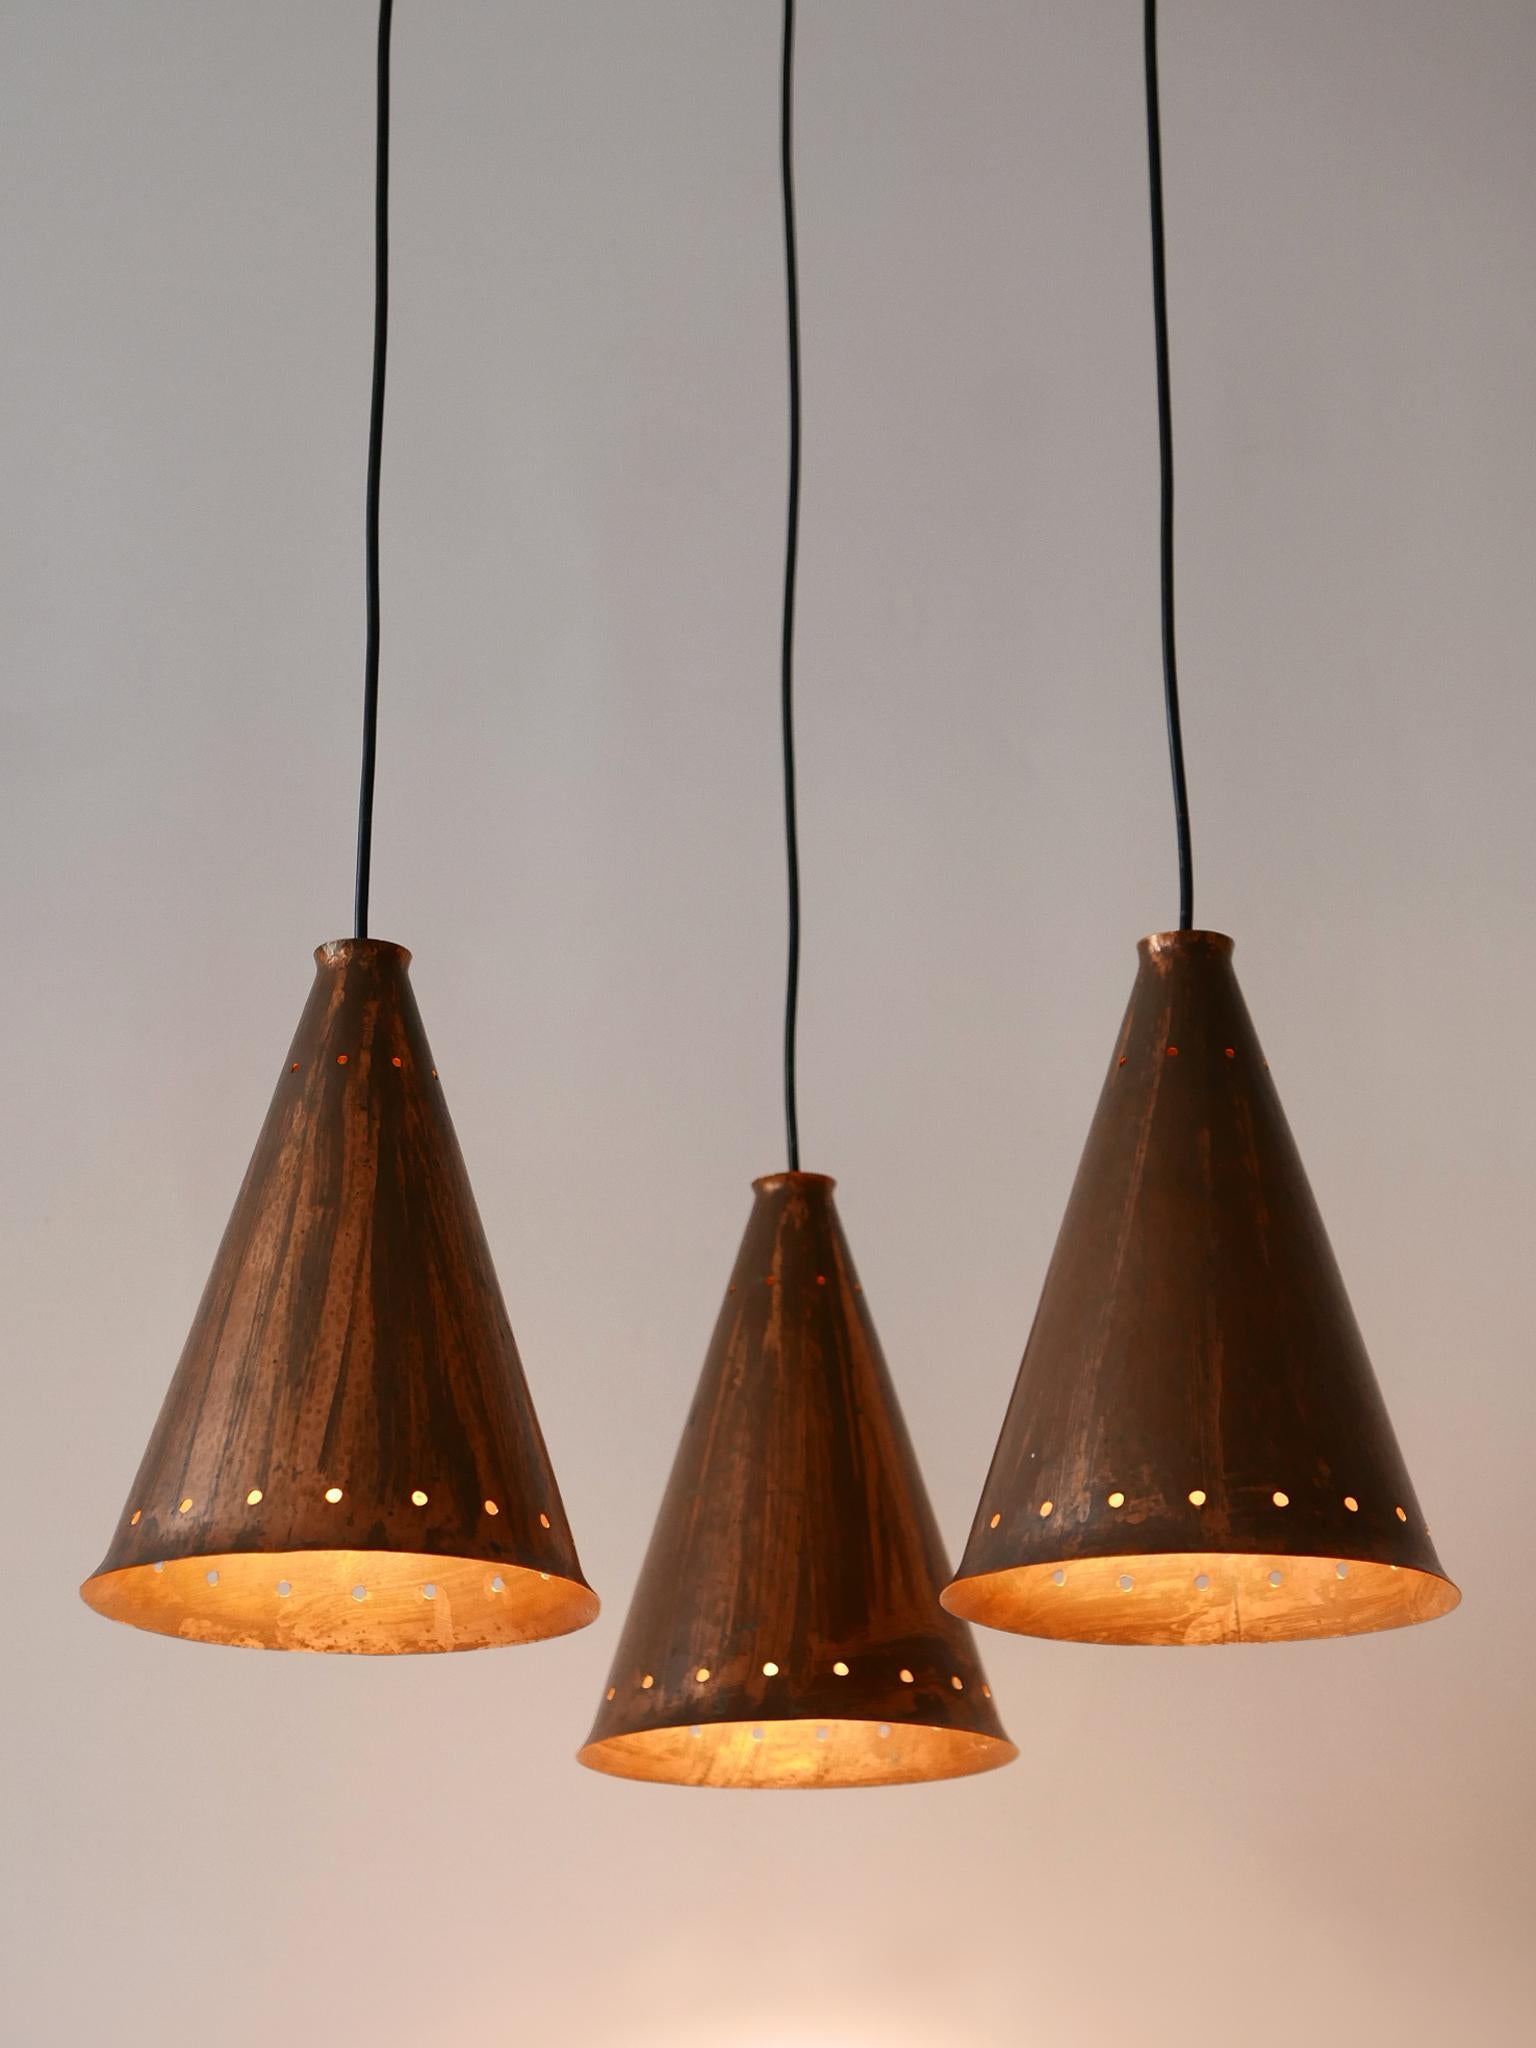 Exceptional & Large Mid-Century Modern Copper Pendant Lamp Scandinavia, 1950s For Sale 8